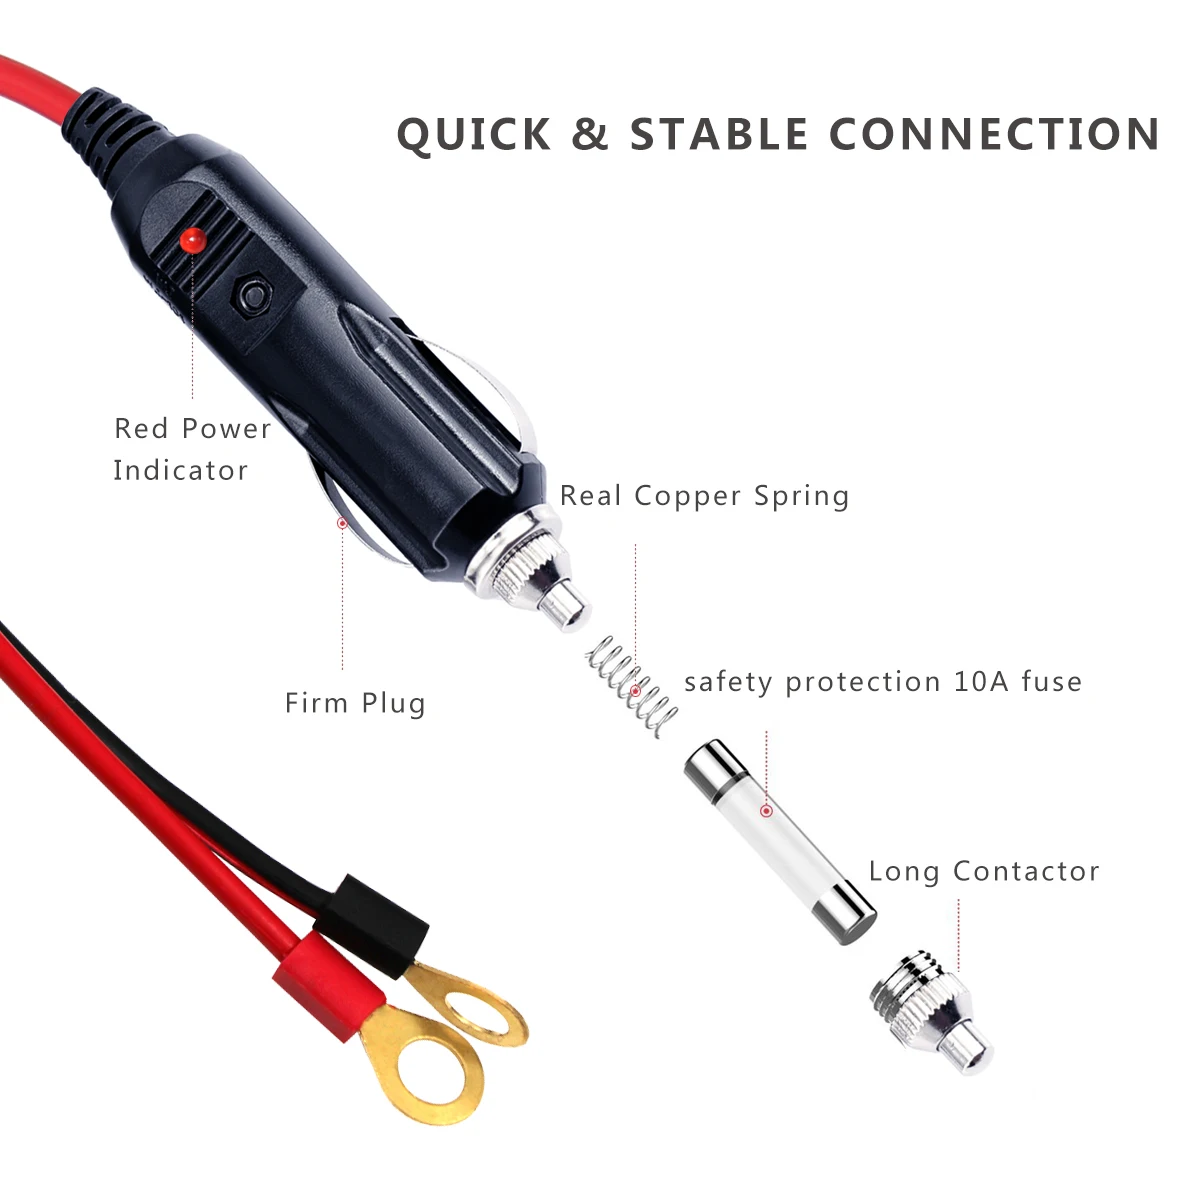 DC 12V Car Auto Male Plug Cigarette Lighter Adapter Power Supply Cord with 42cm Cable Wire For Air Pump